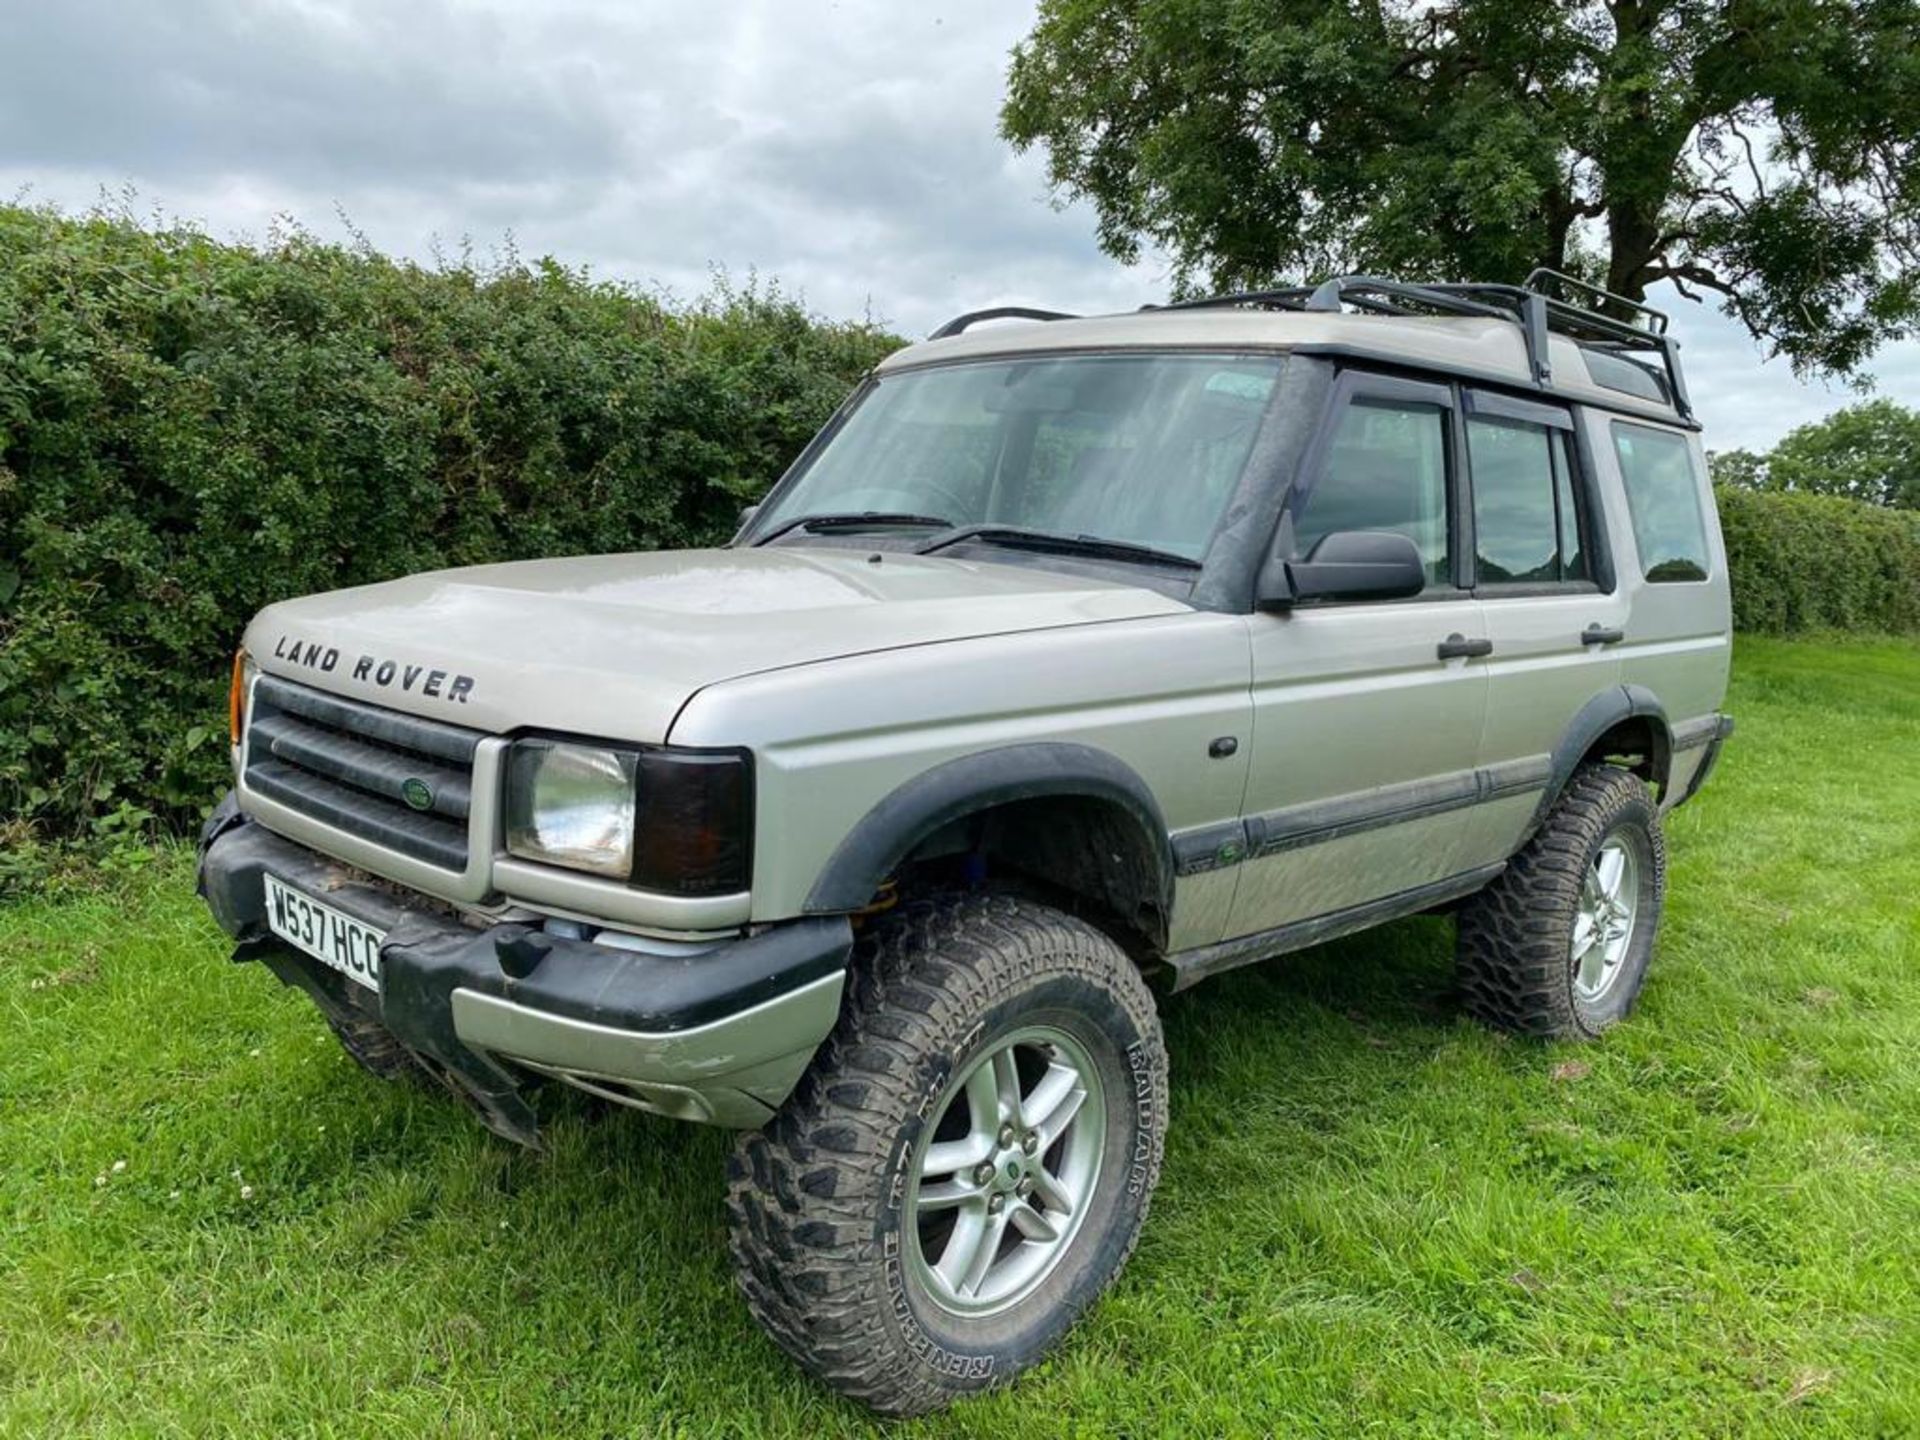 LAND ROVER DISCOVERY TD5GS OFF ROAD 4X4 MONSTER TRUCK LOCATION NORTH YORKSHIRE.